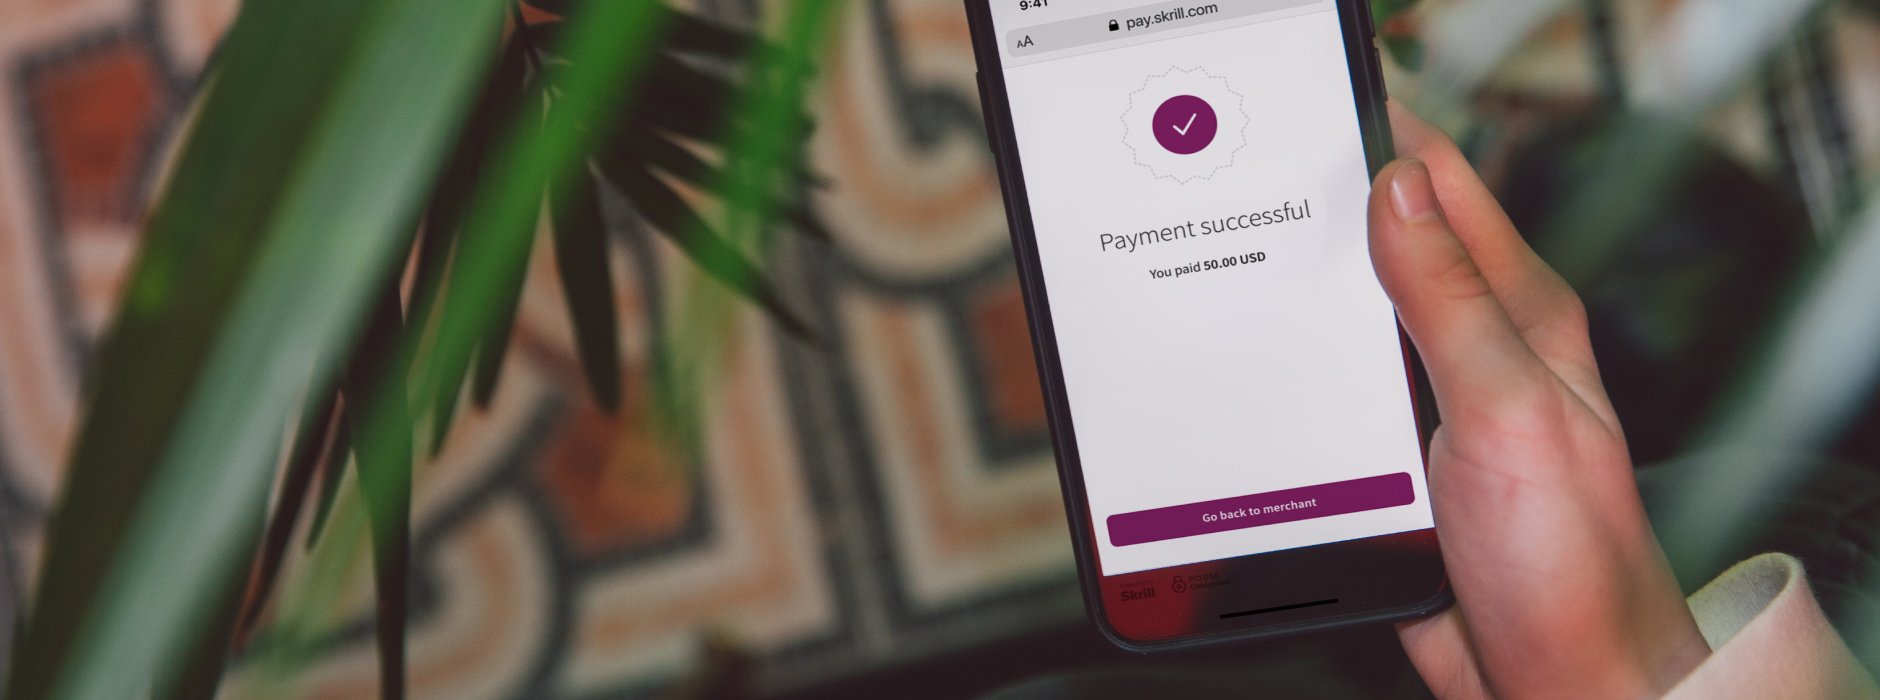 app showing successful payment